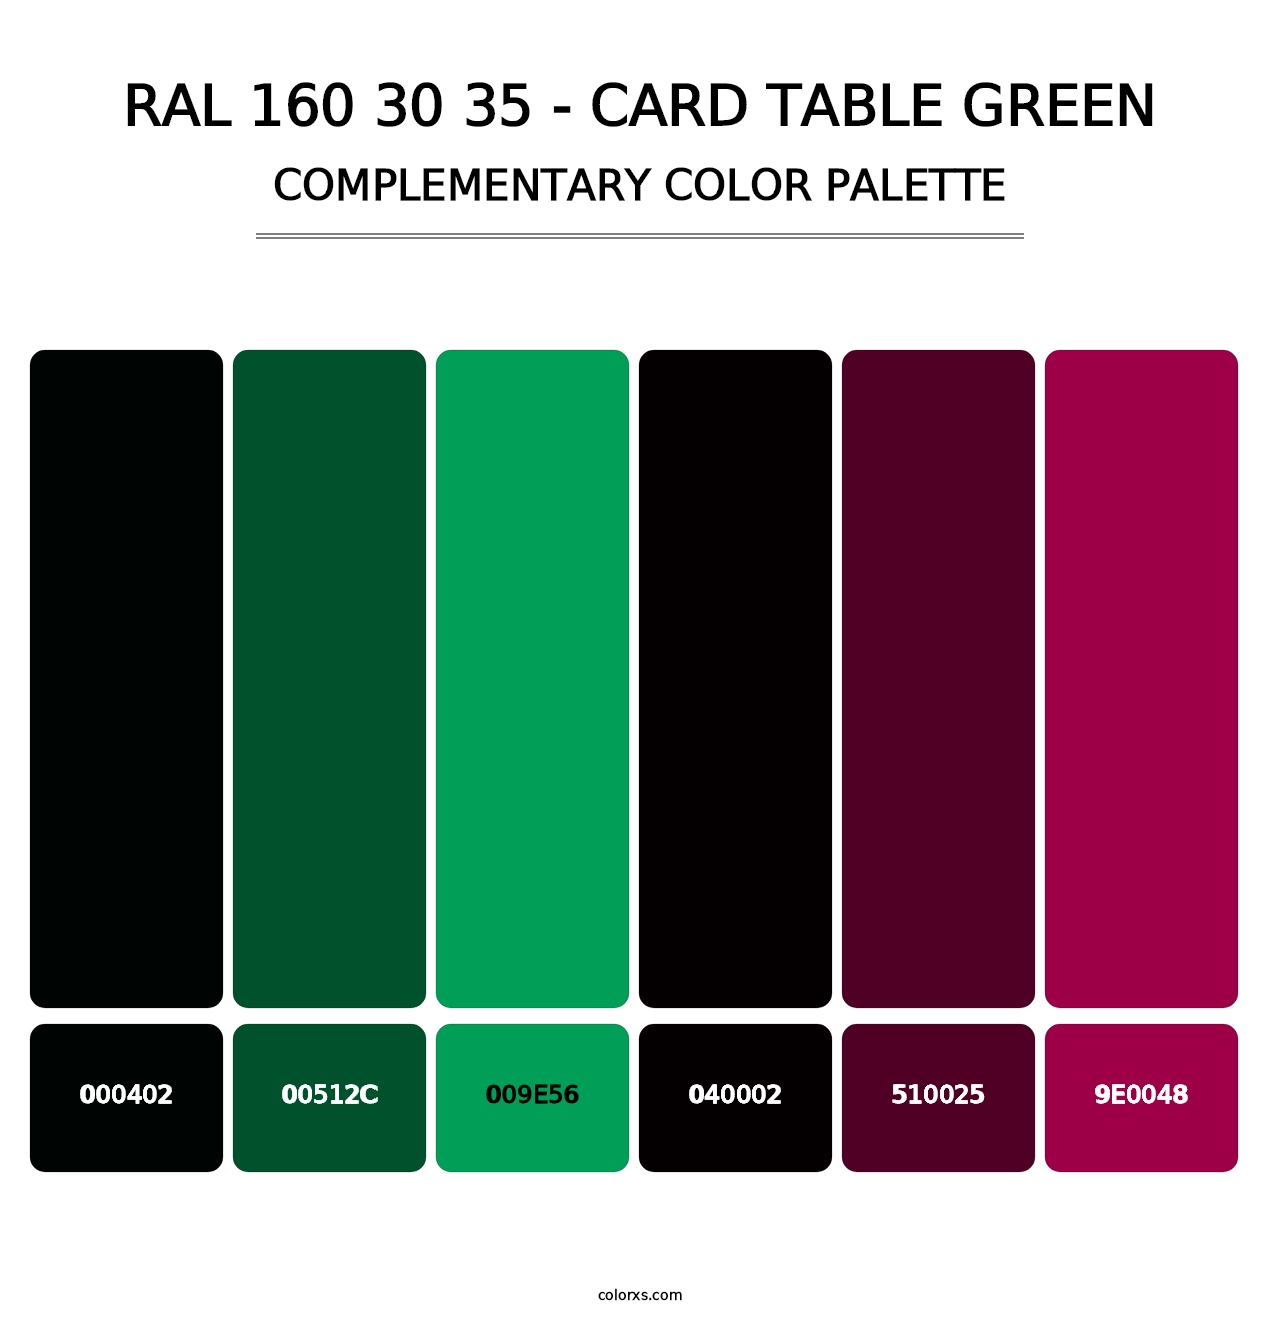 RAL 160 30 35 - Card Table Green - Complementary Color Palette